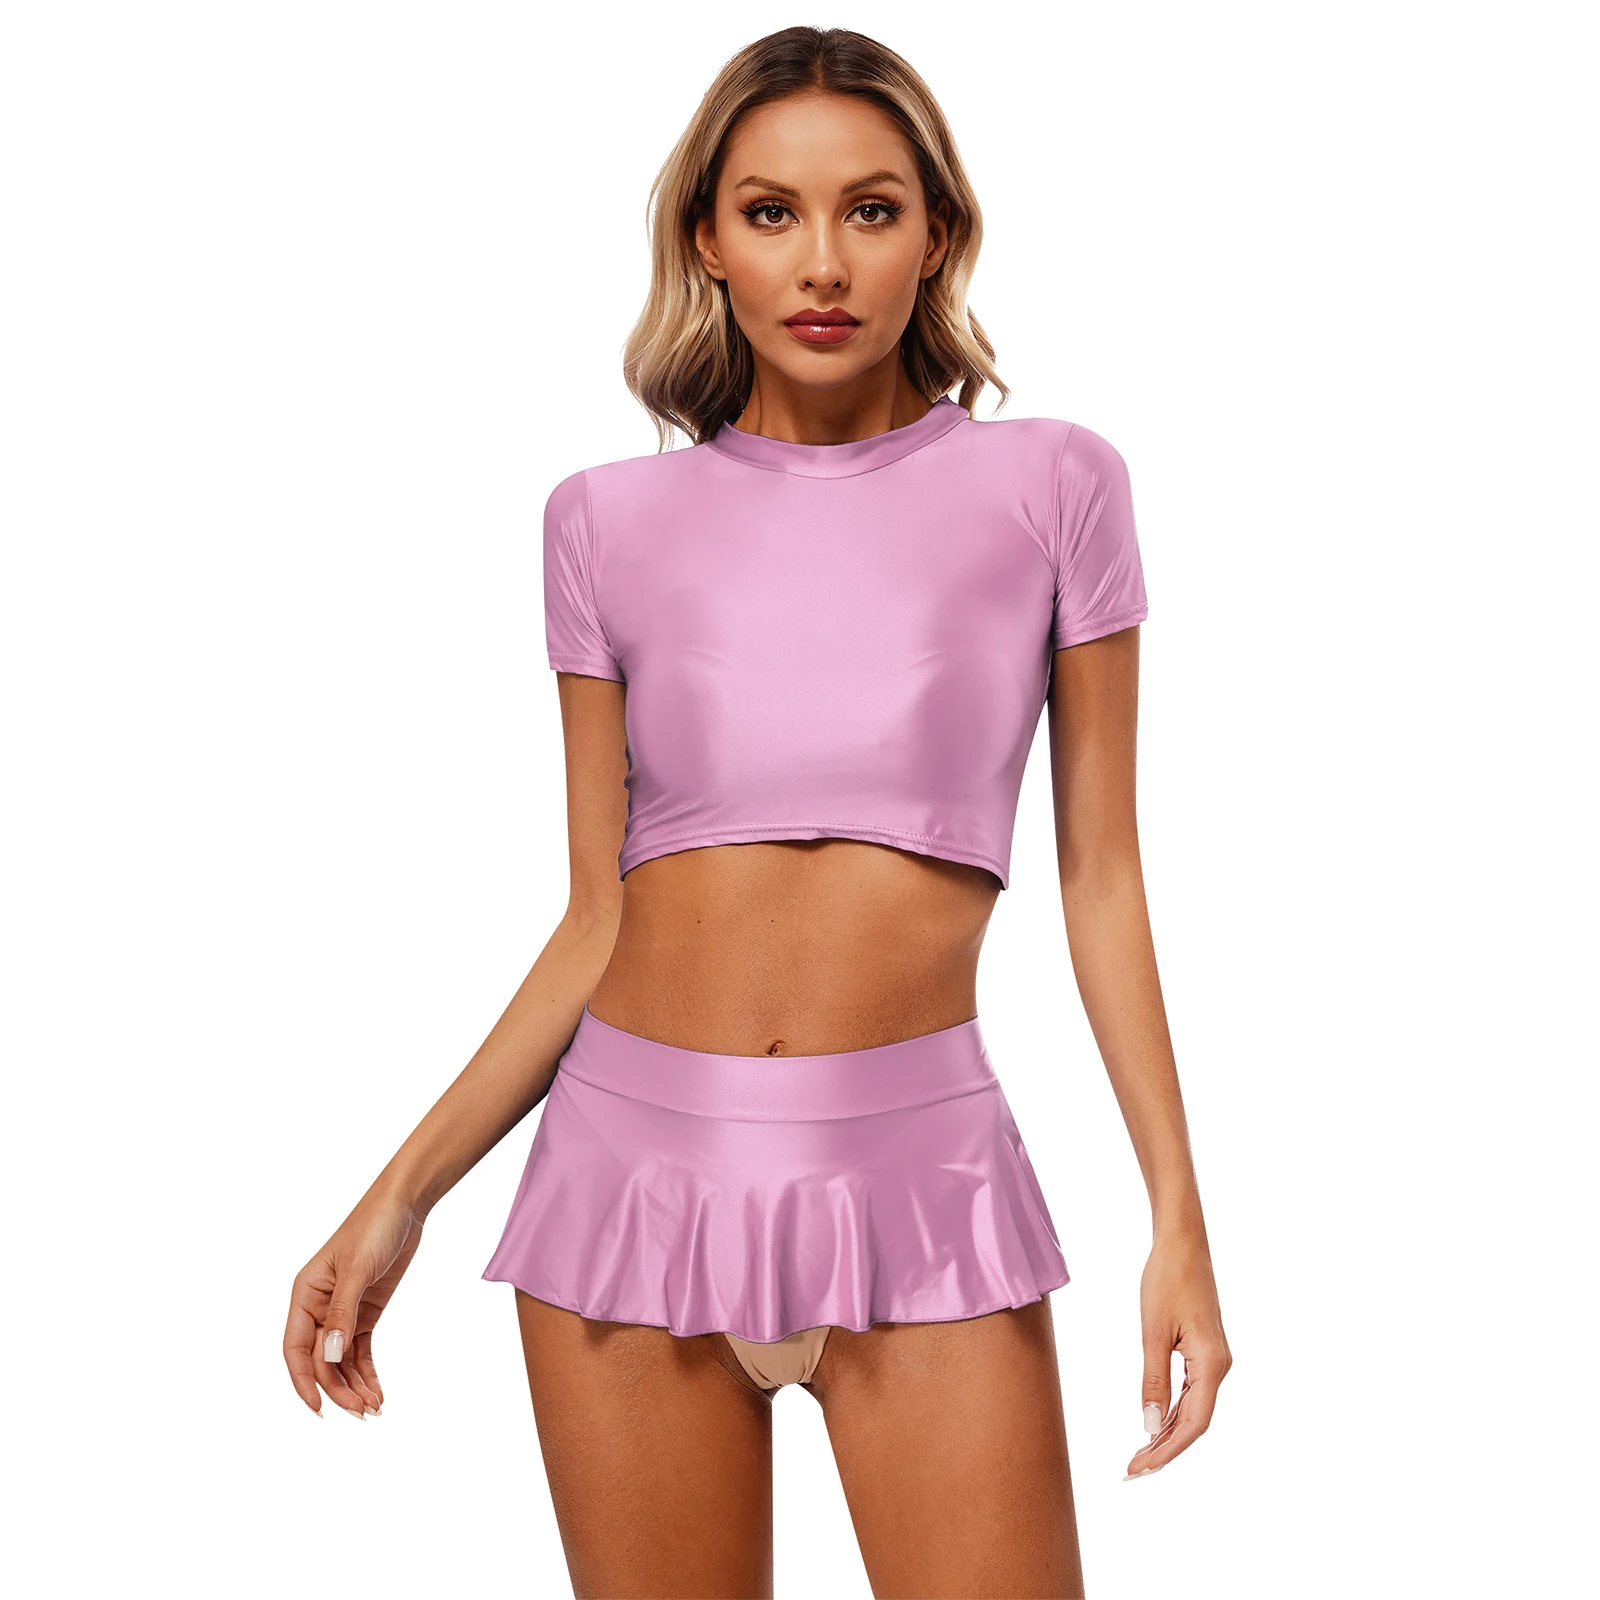 

Womens Glossy Short Sleeve Crop Top with Low Rise Ruffled Miniskirt Sports Fitness Pool Party Beachwear Pole Dancing Clubwear